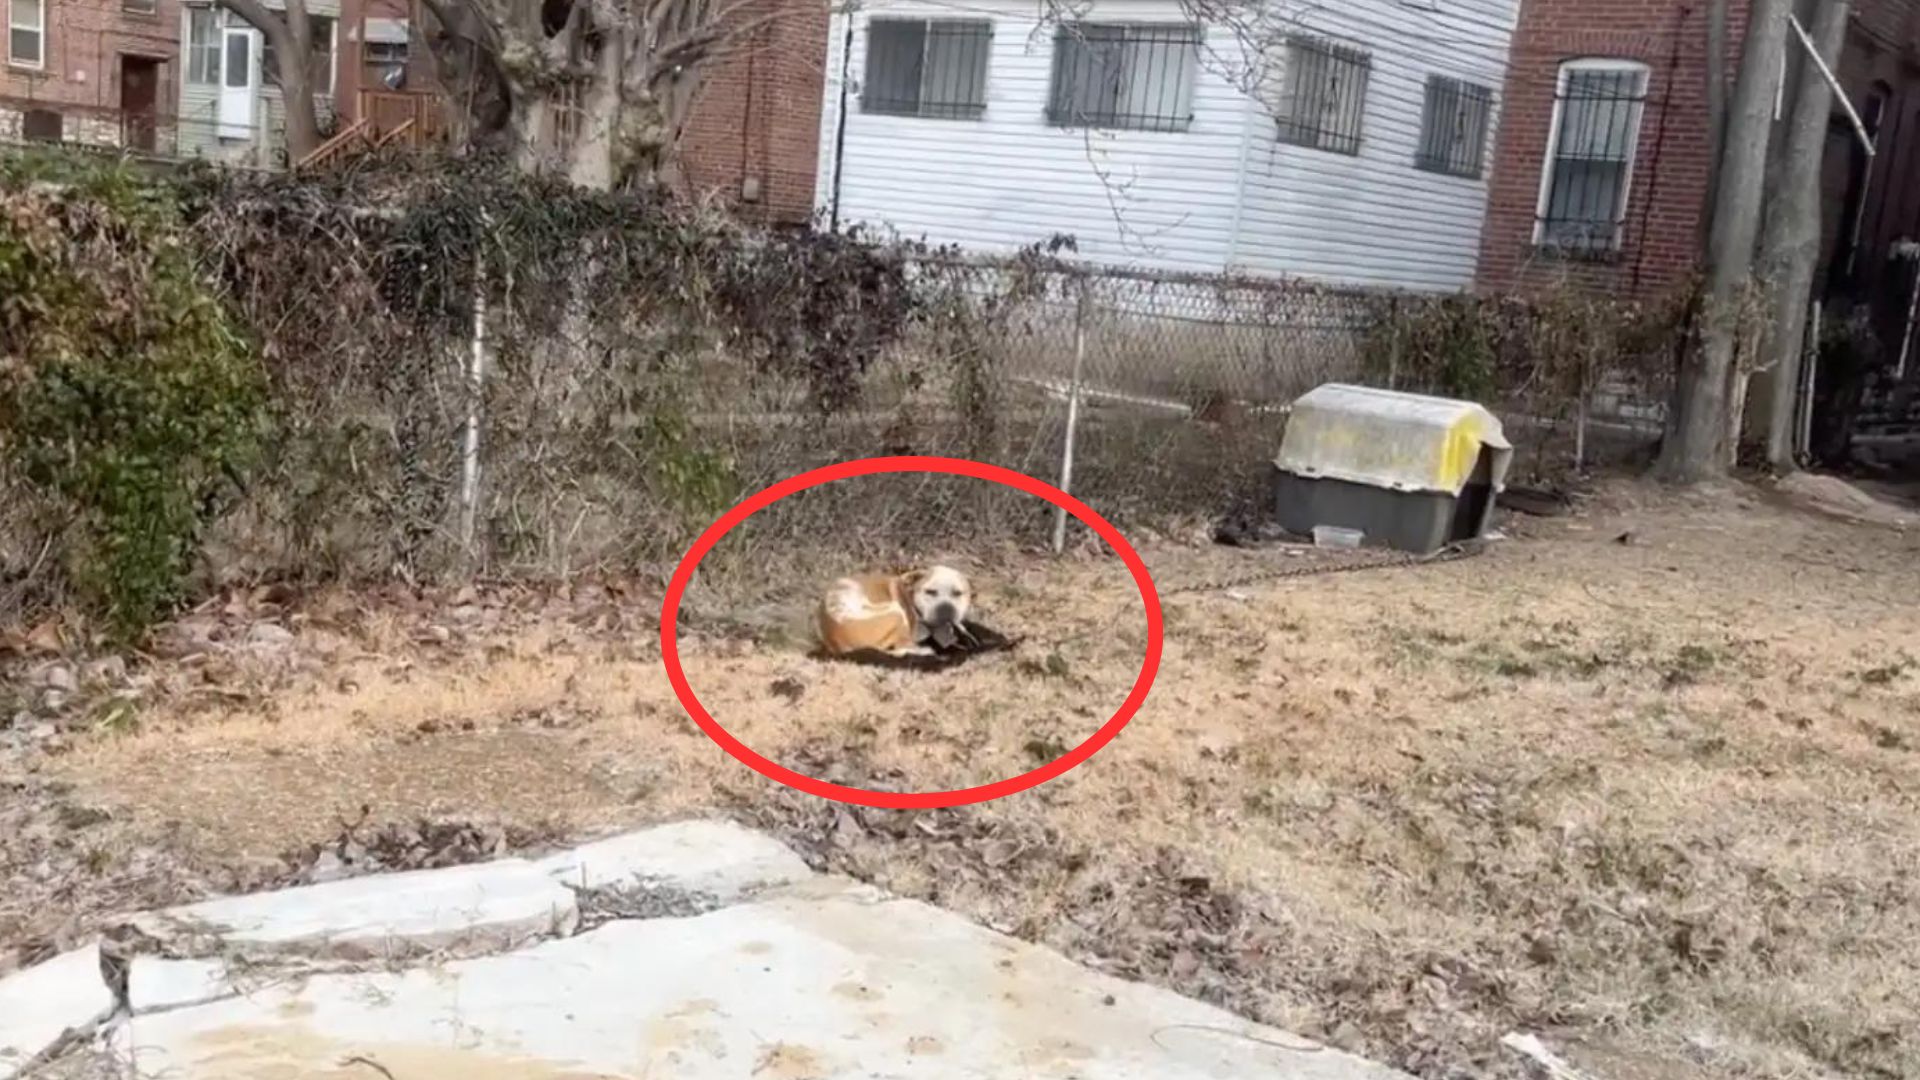 Rescuers Shocked To Find A Helpless, Freezing Dog Chained In An Abandoned Yard